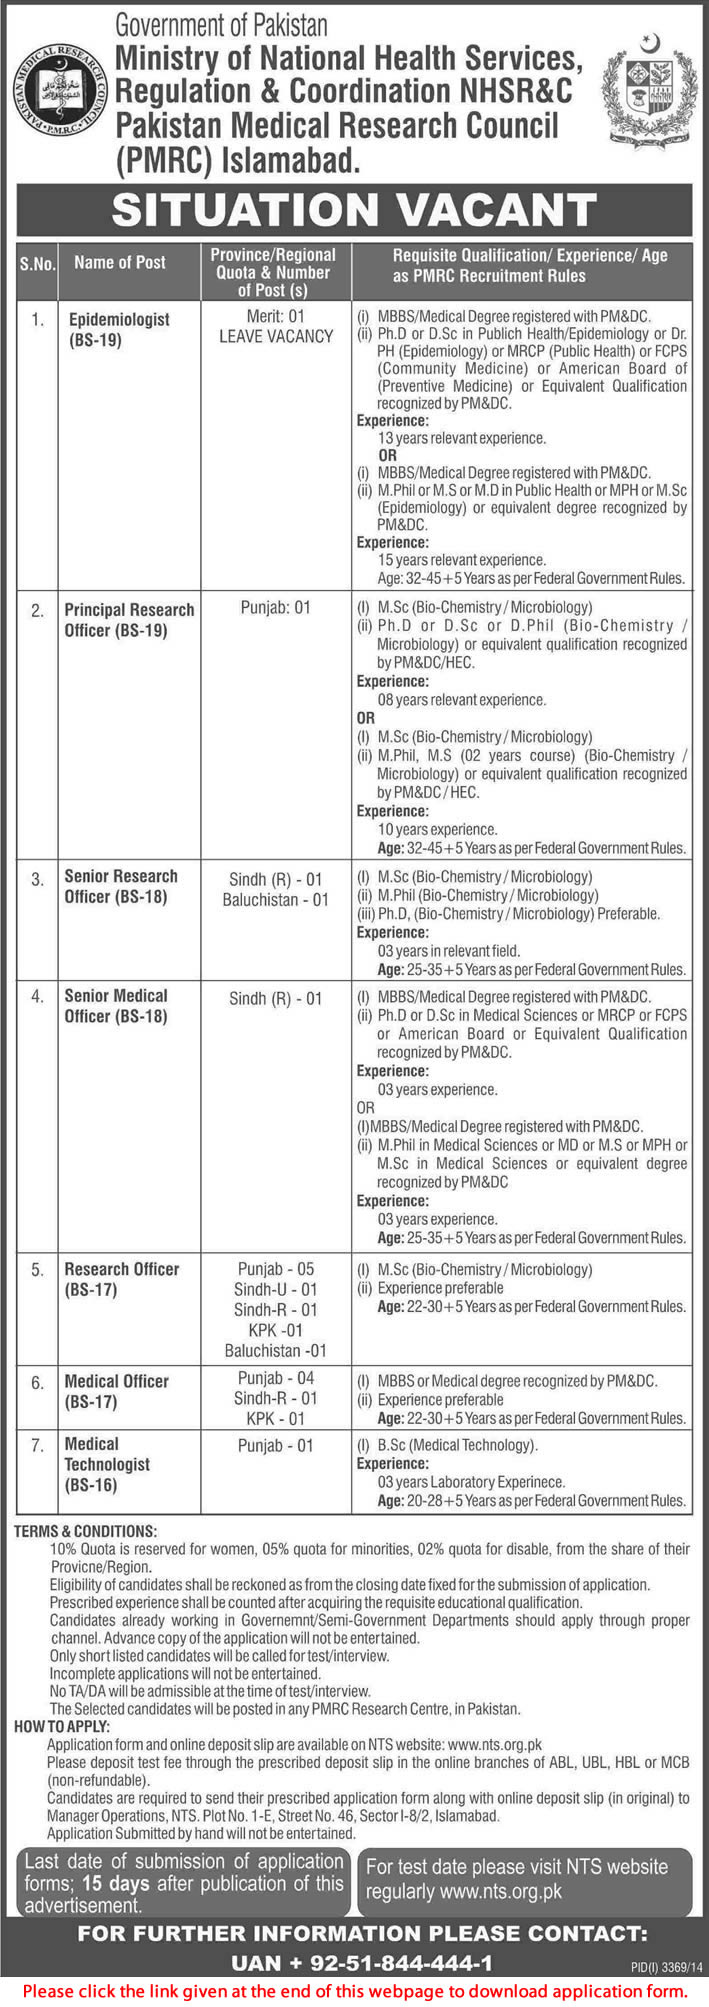 Pakistan Medical Research Council (PMRC) Islamabad Jobs 2015 Latest NHSR&C